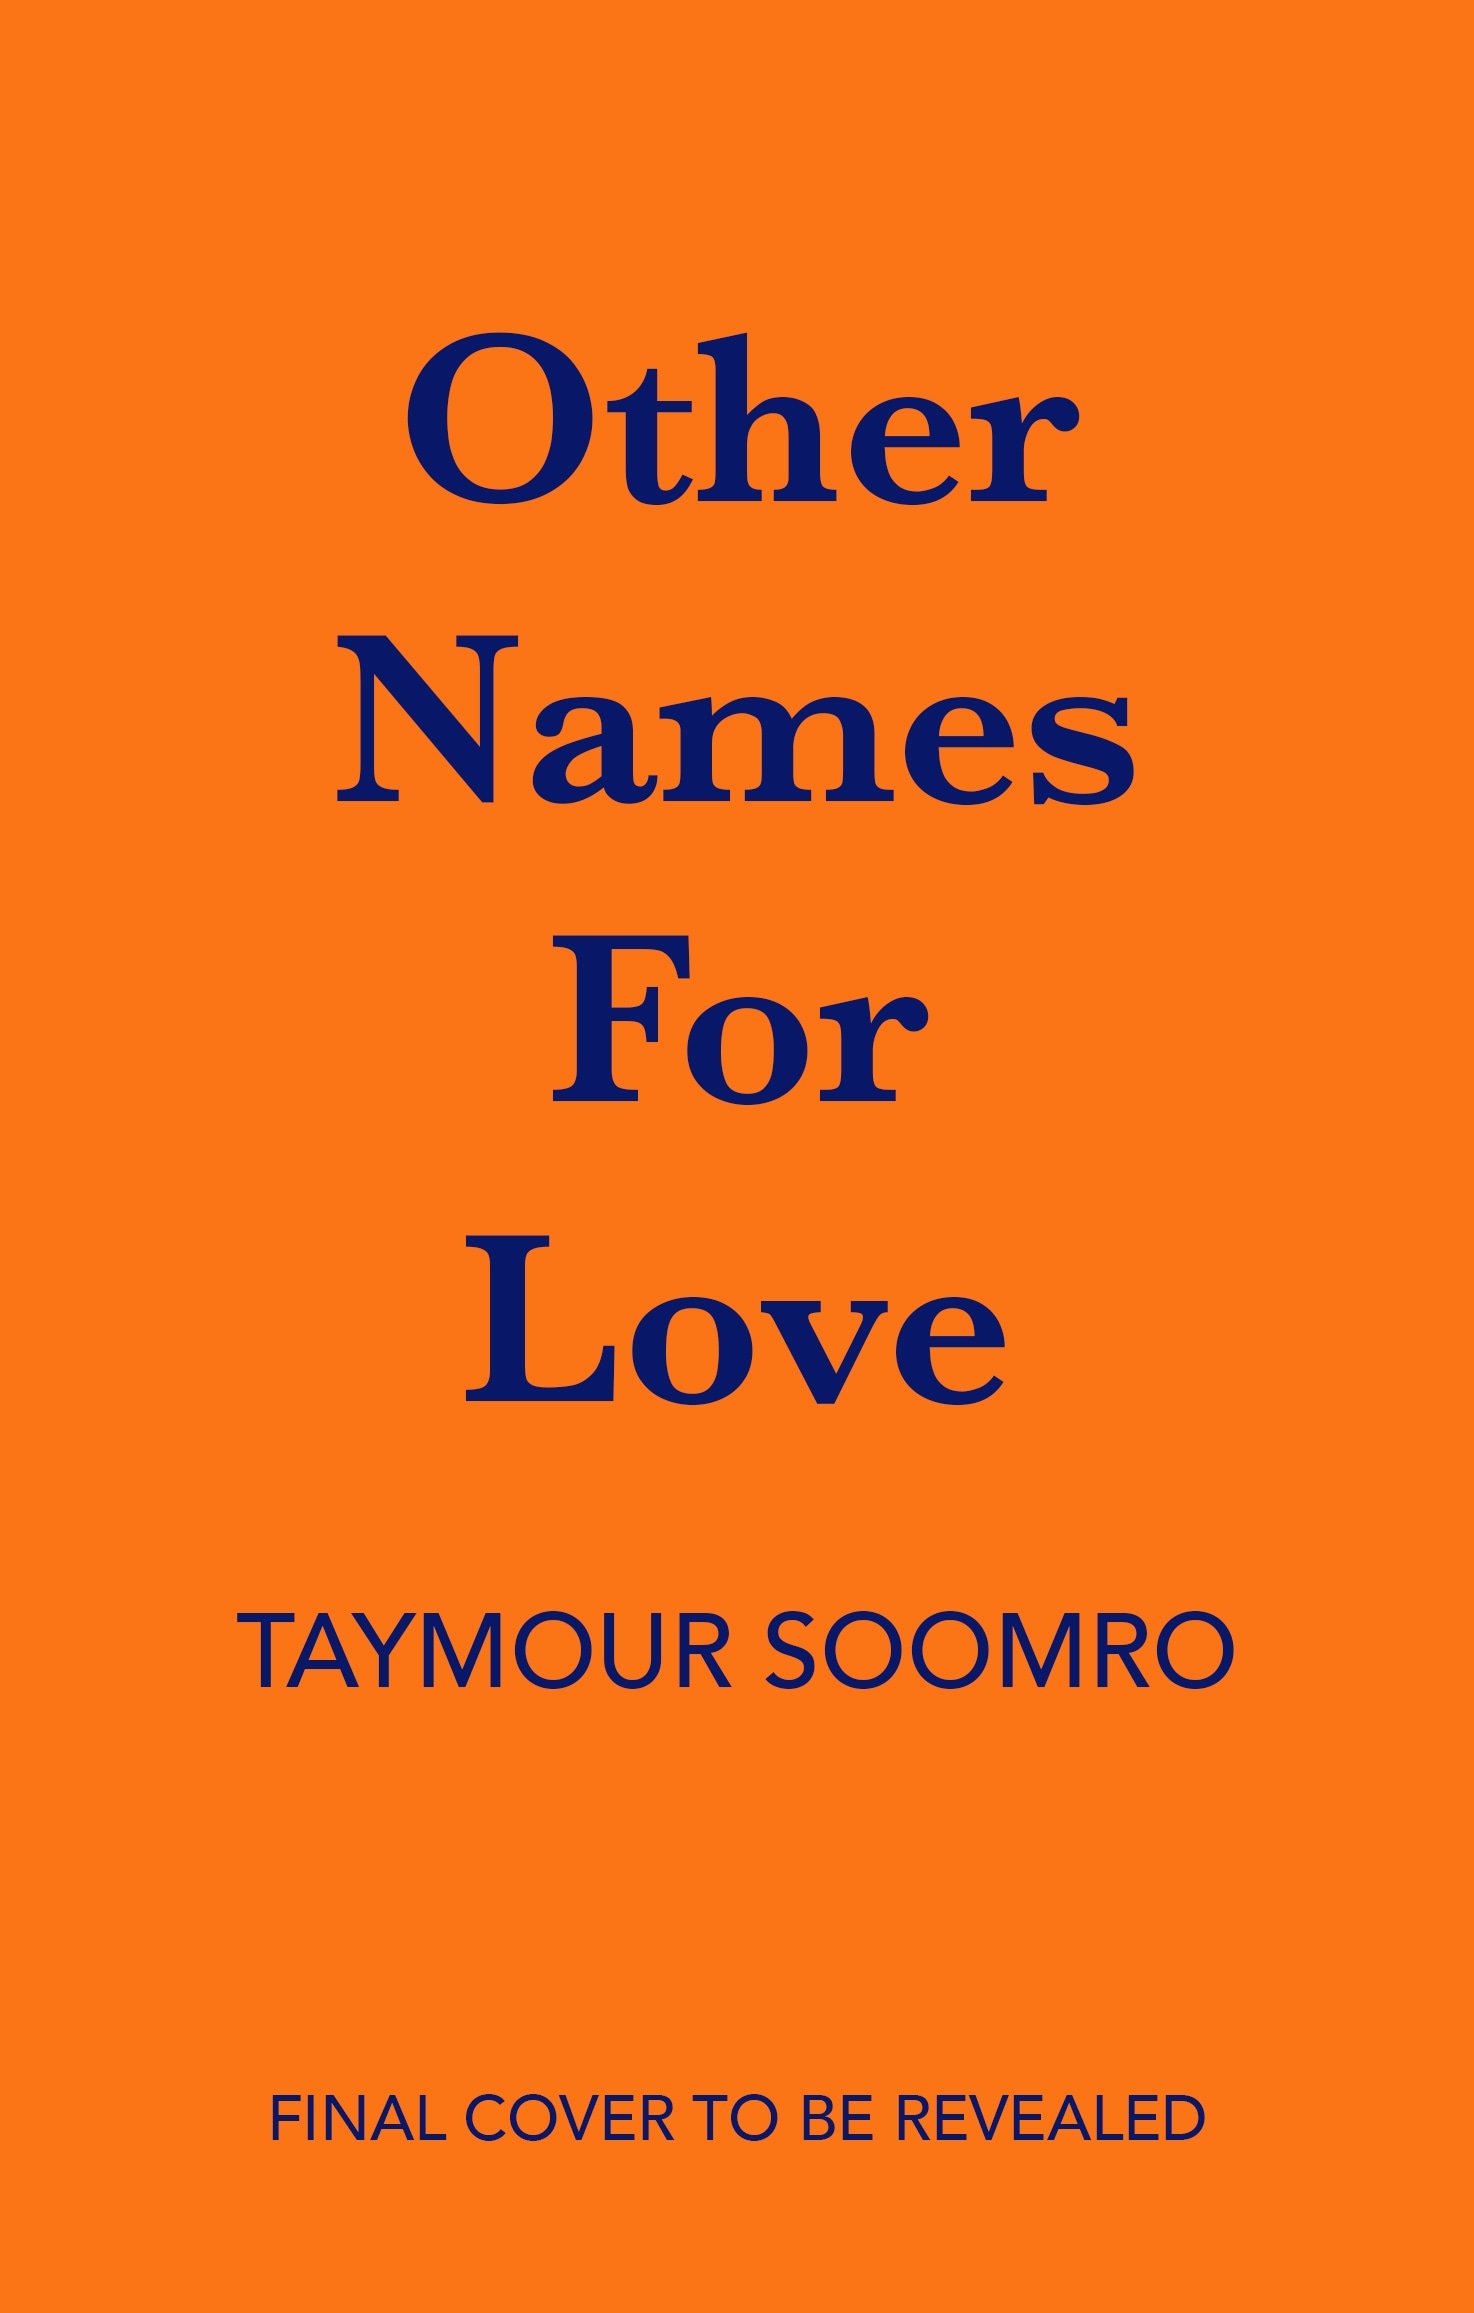 Book “Other Names for Love” by Taymour Soomro — July 7, 2022